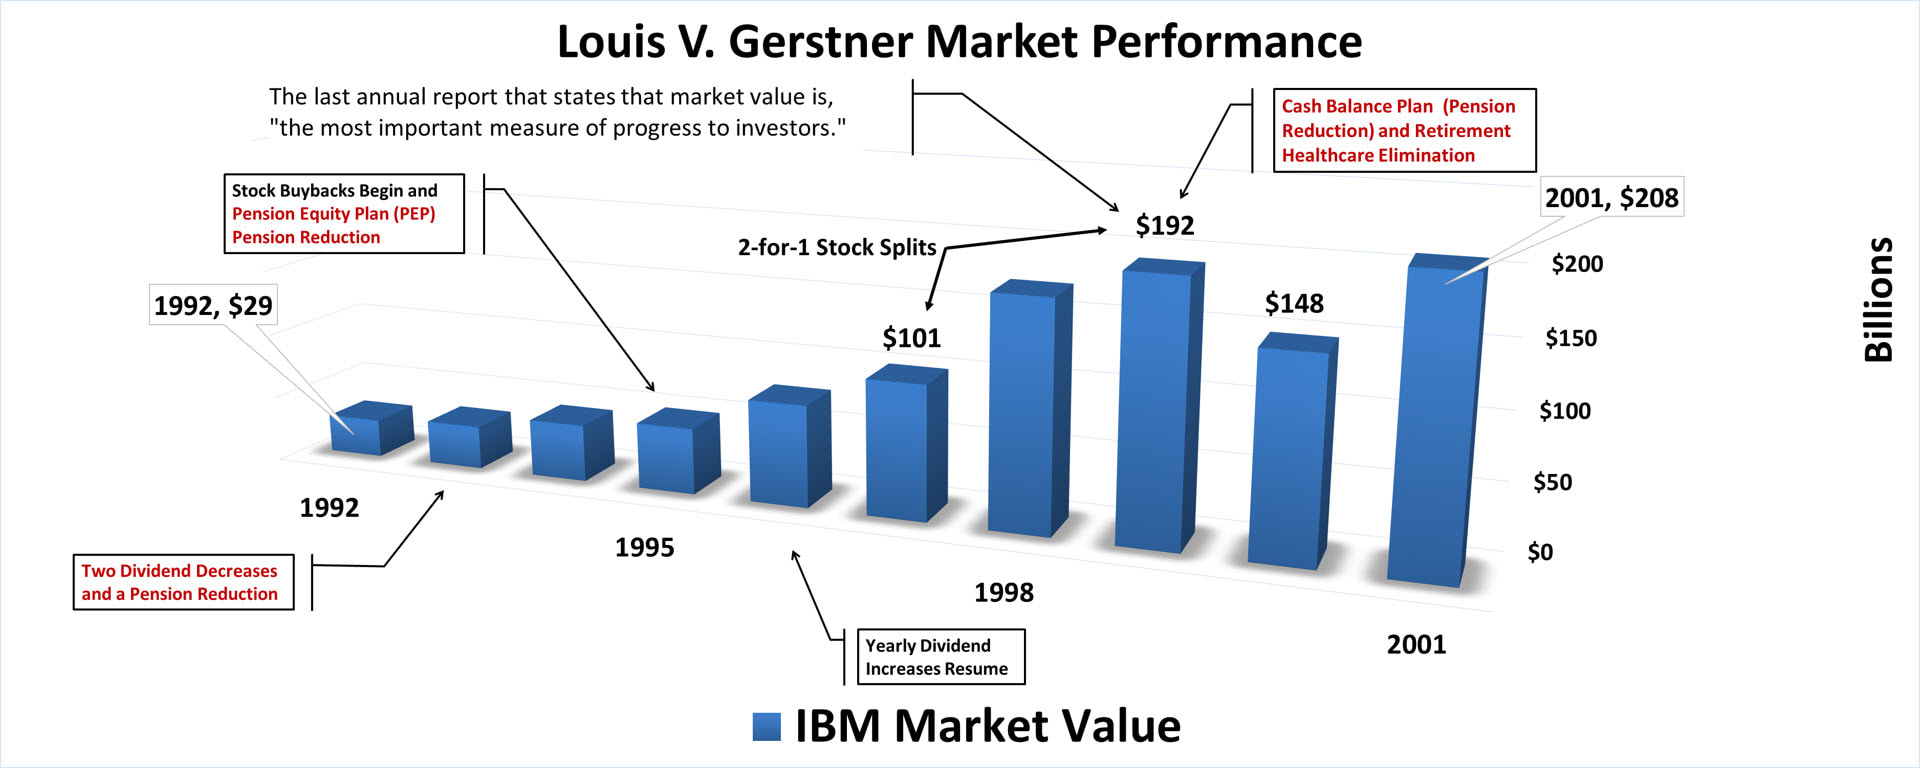 A color bar chart showing IBM's yearly market value from 1992 to 2001 for Chief Executive Officer (CEO) Louis V. (Lou) Gerstner.